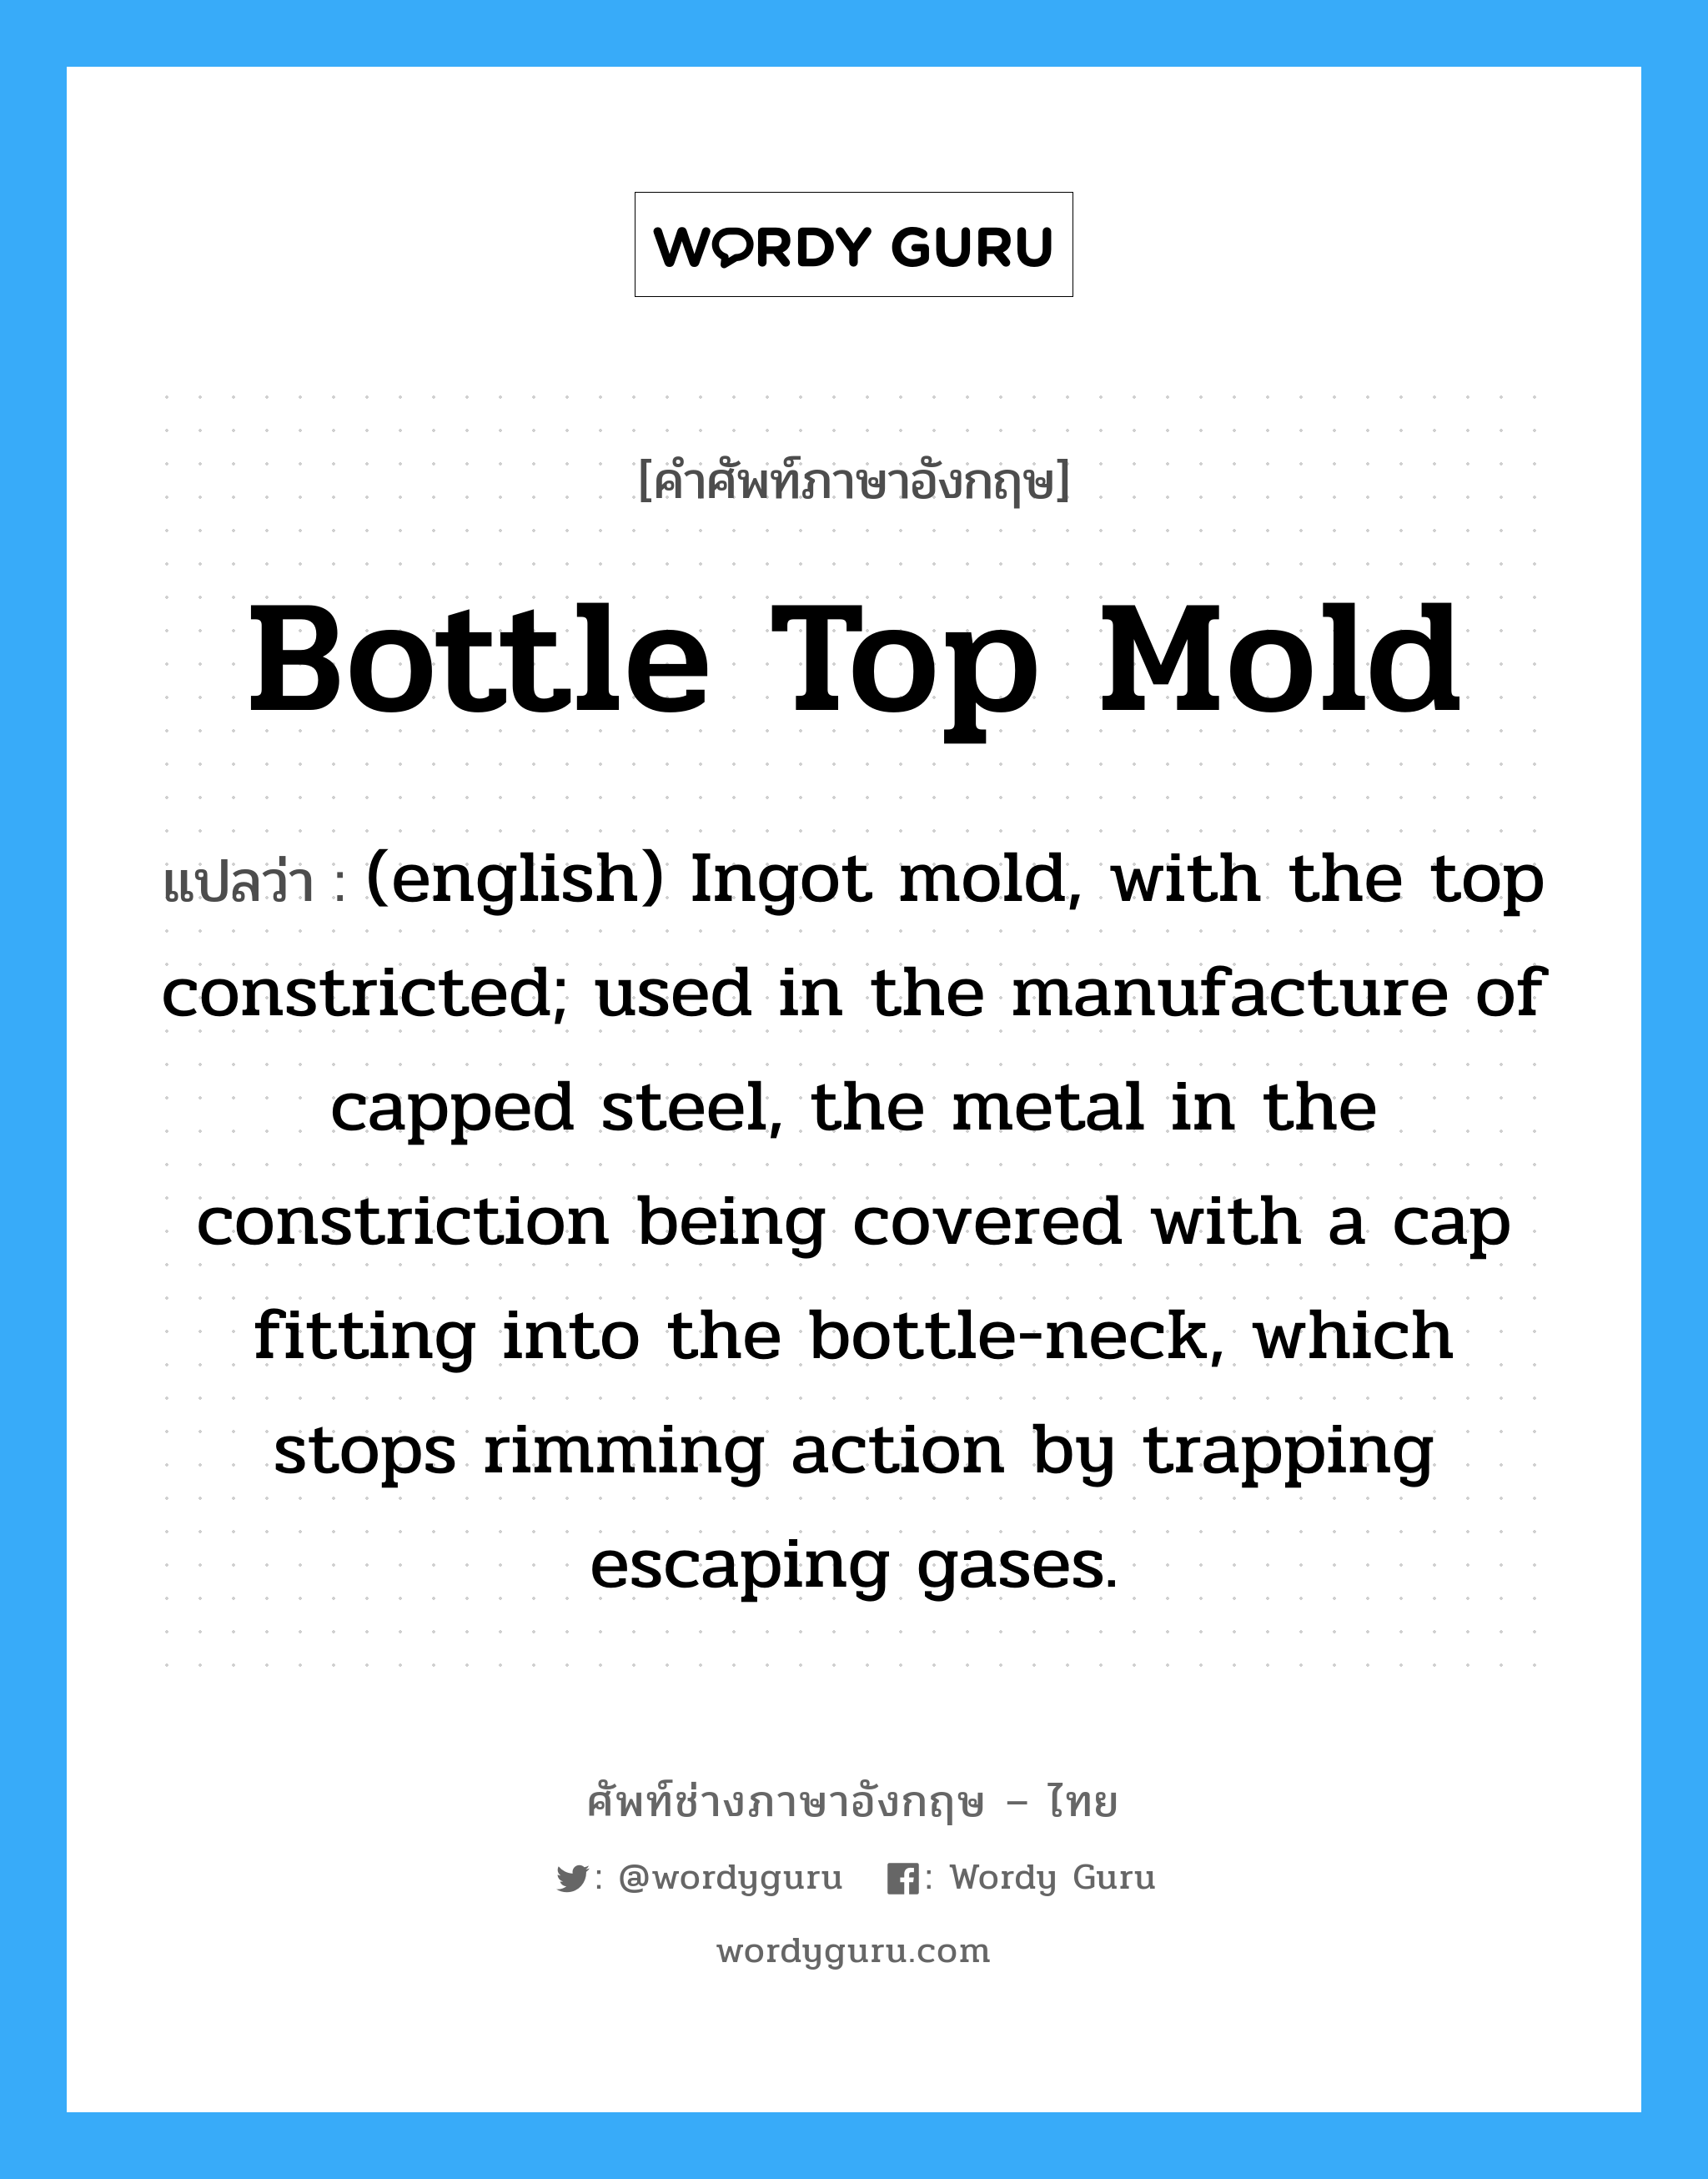 Bottle Top Mold แปลว่า?, คำศัพท์ช่างภาษาอังกฤษ - ไทย Bottle Top Mold คำศัพท์ภาษาอังกฤษ Bottle Top Mold แปลว่า (english) Ingot mold, with the top constricted; used in the manufacture of capped steel, the metal in the constriction being covered with a cap fitting into the bottle-neck, which stops rimming action by trapping escaping gases.